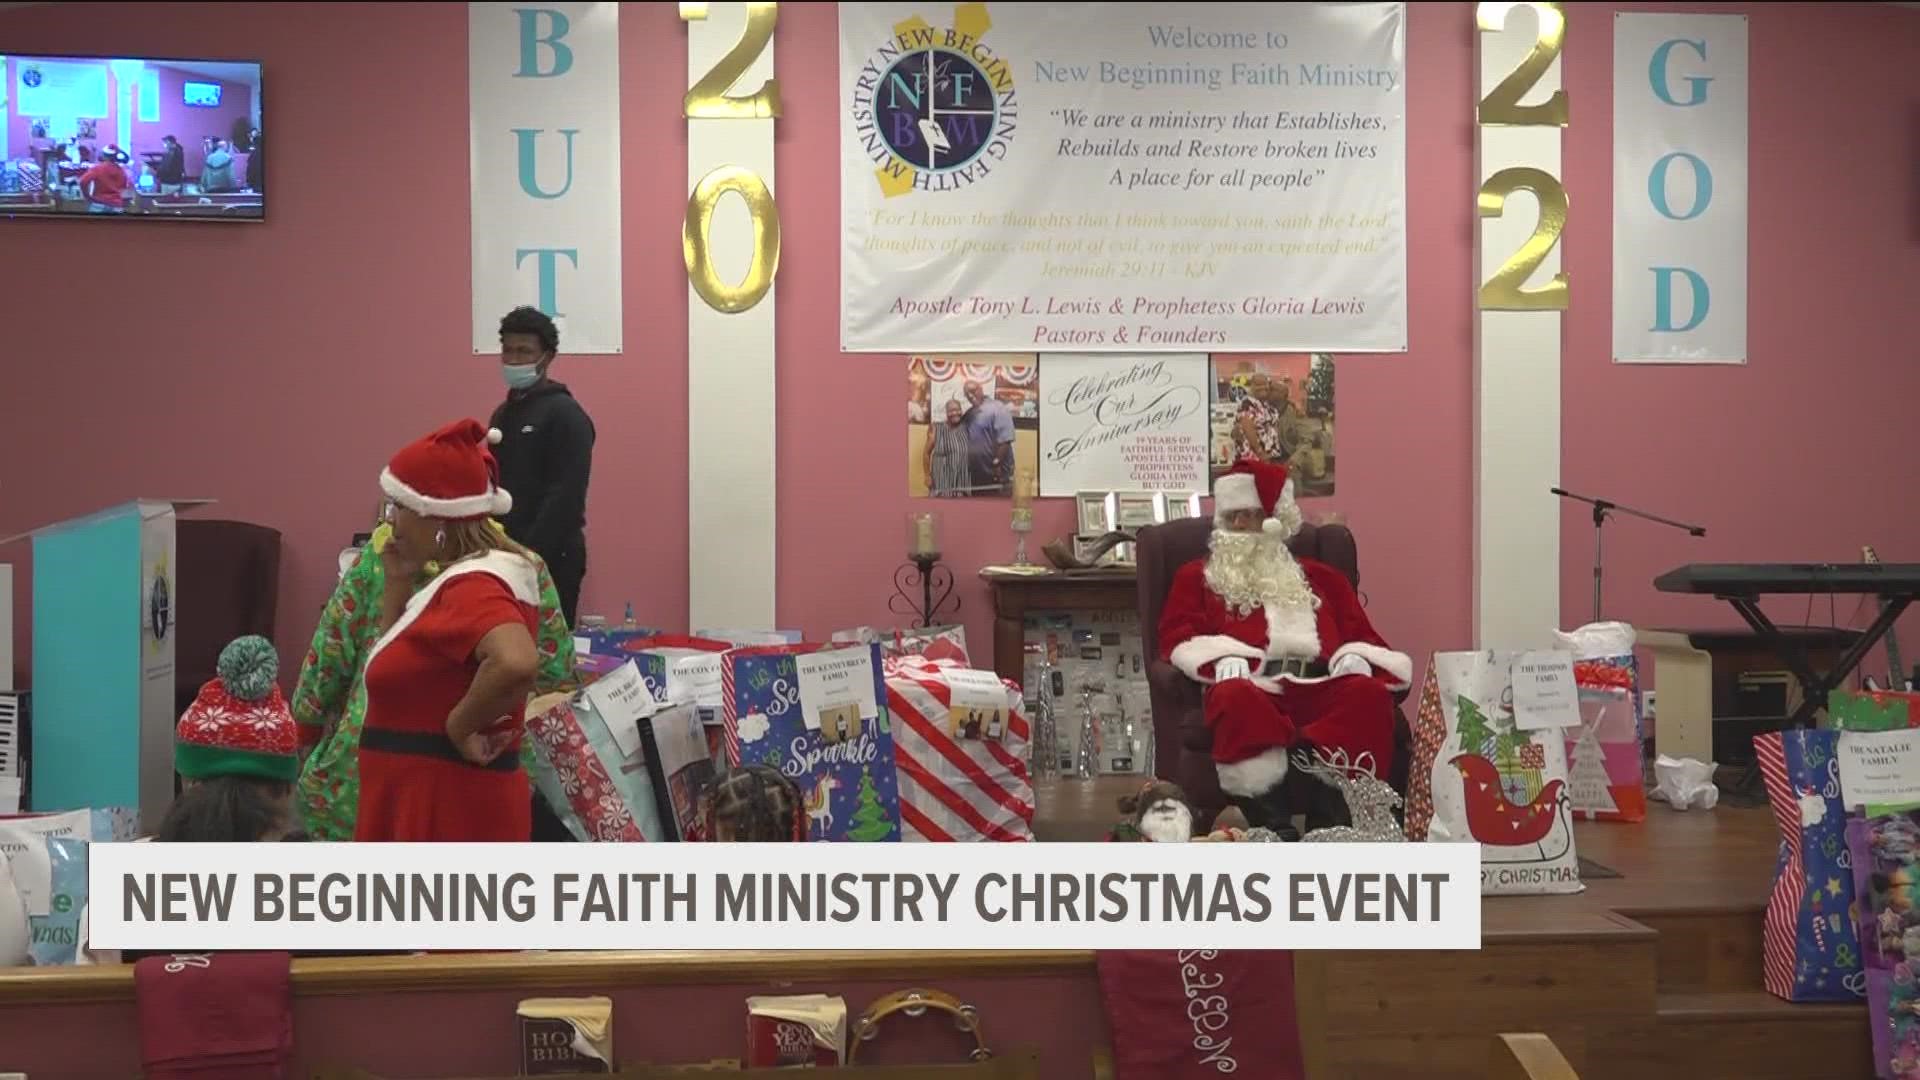 For the past 22 years now, New Beginning Faith Ministry in Longview has kept the tradition of giving back to the community alive.